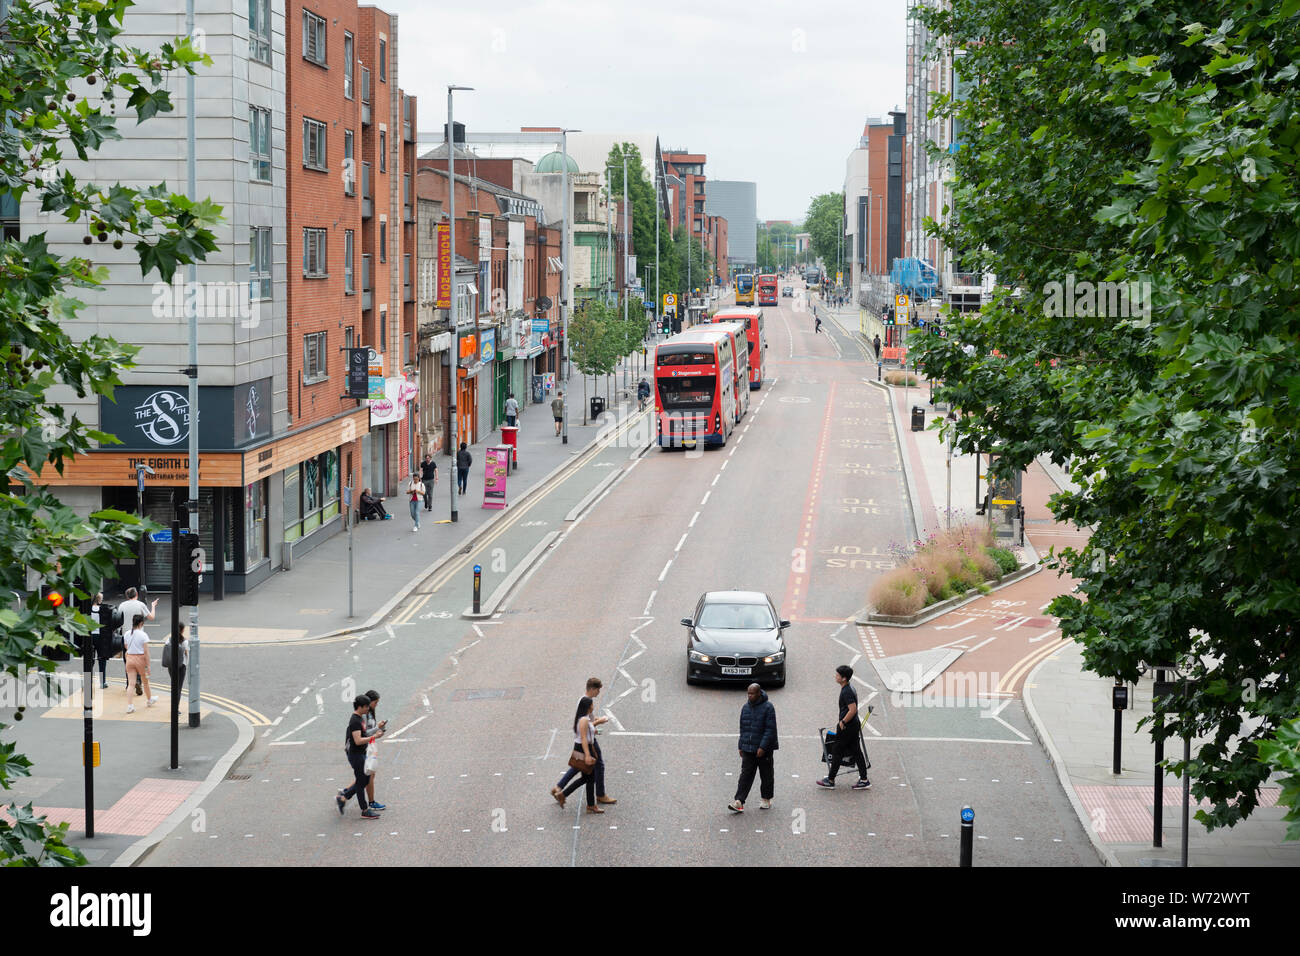 A general view of Oxford Road in Manchester looking southwards from an elevated position. Stock Photo